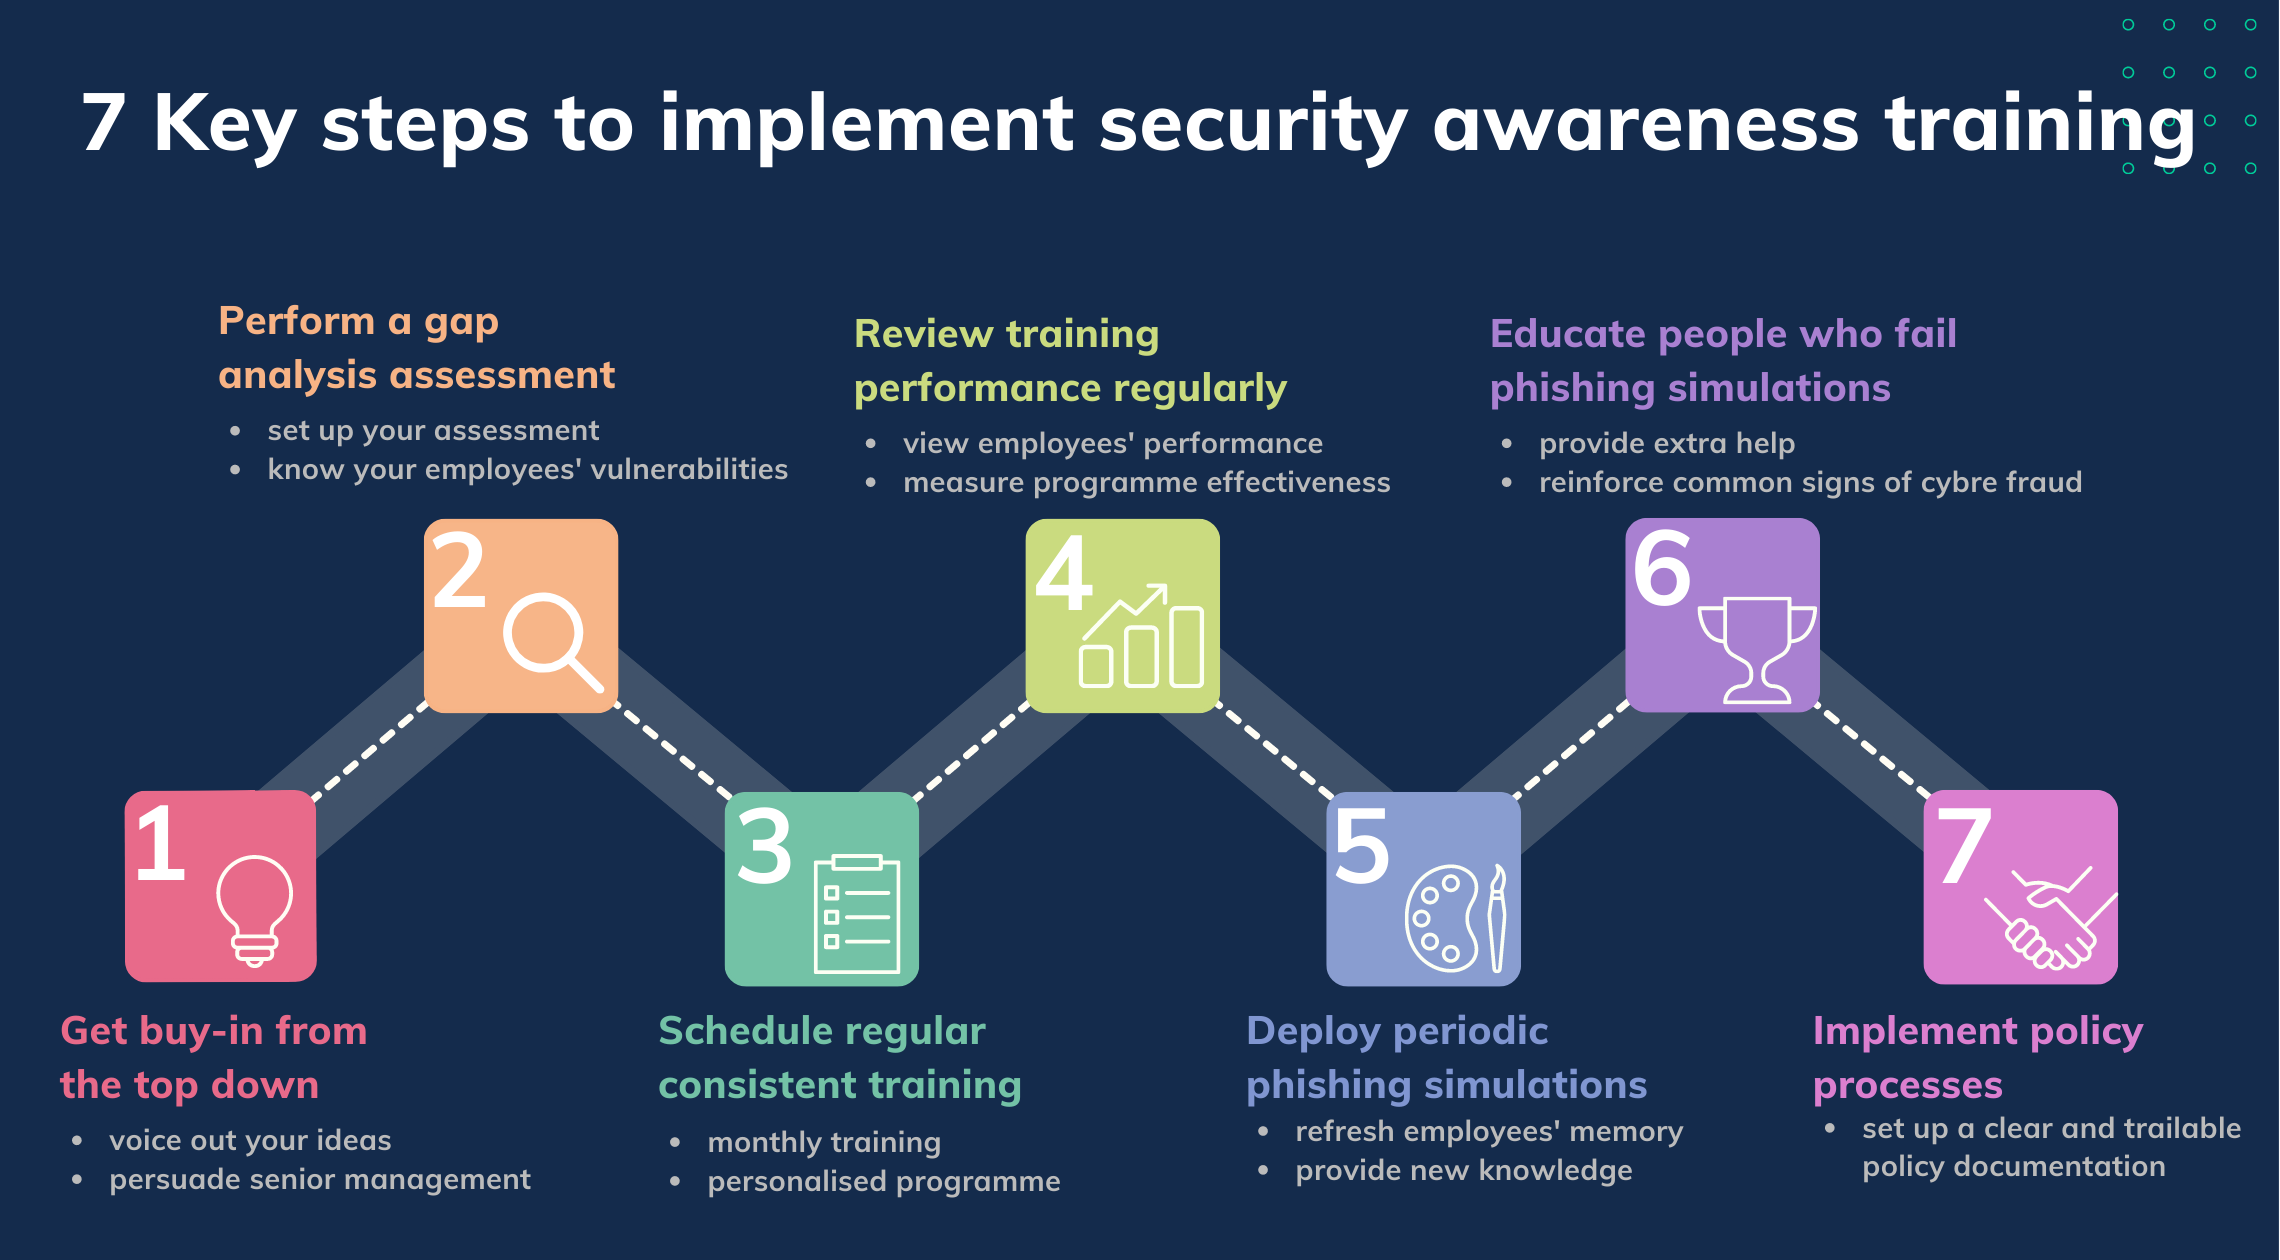 7 Key Steps to implement security awareness training_3